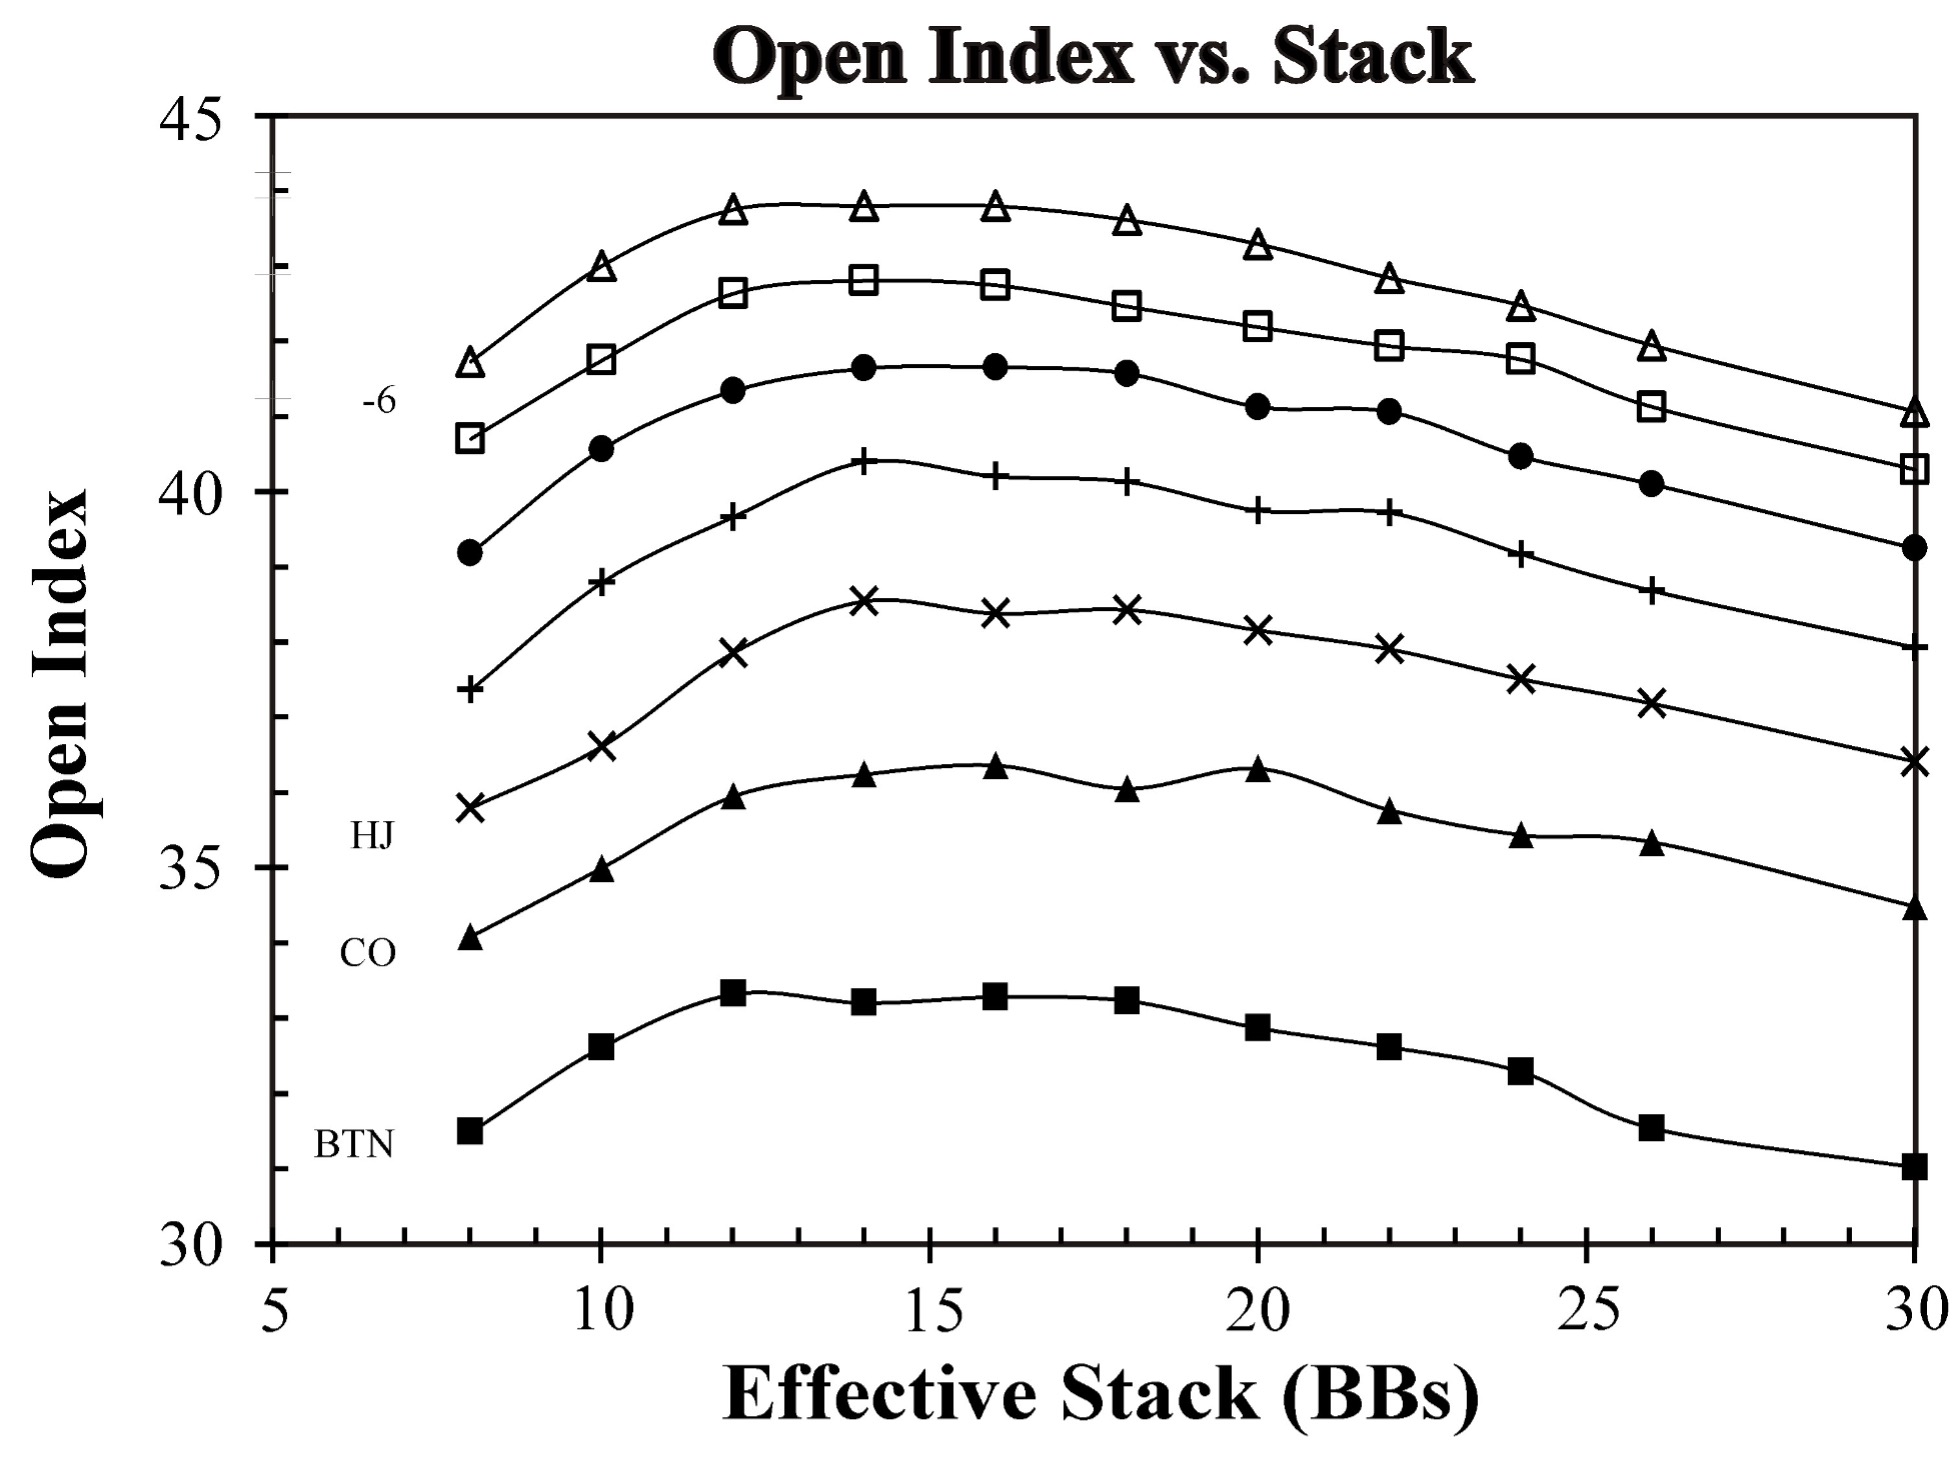 GTO Open Index vs. Effective Stack